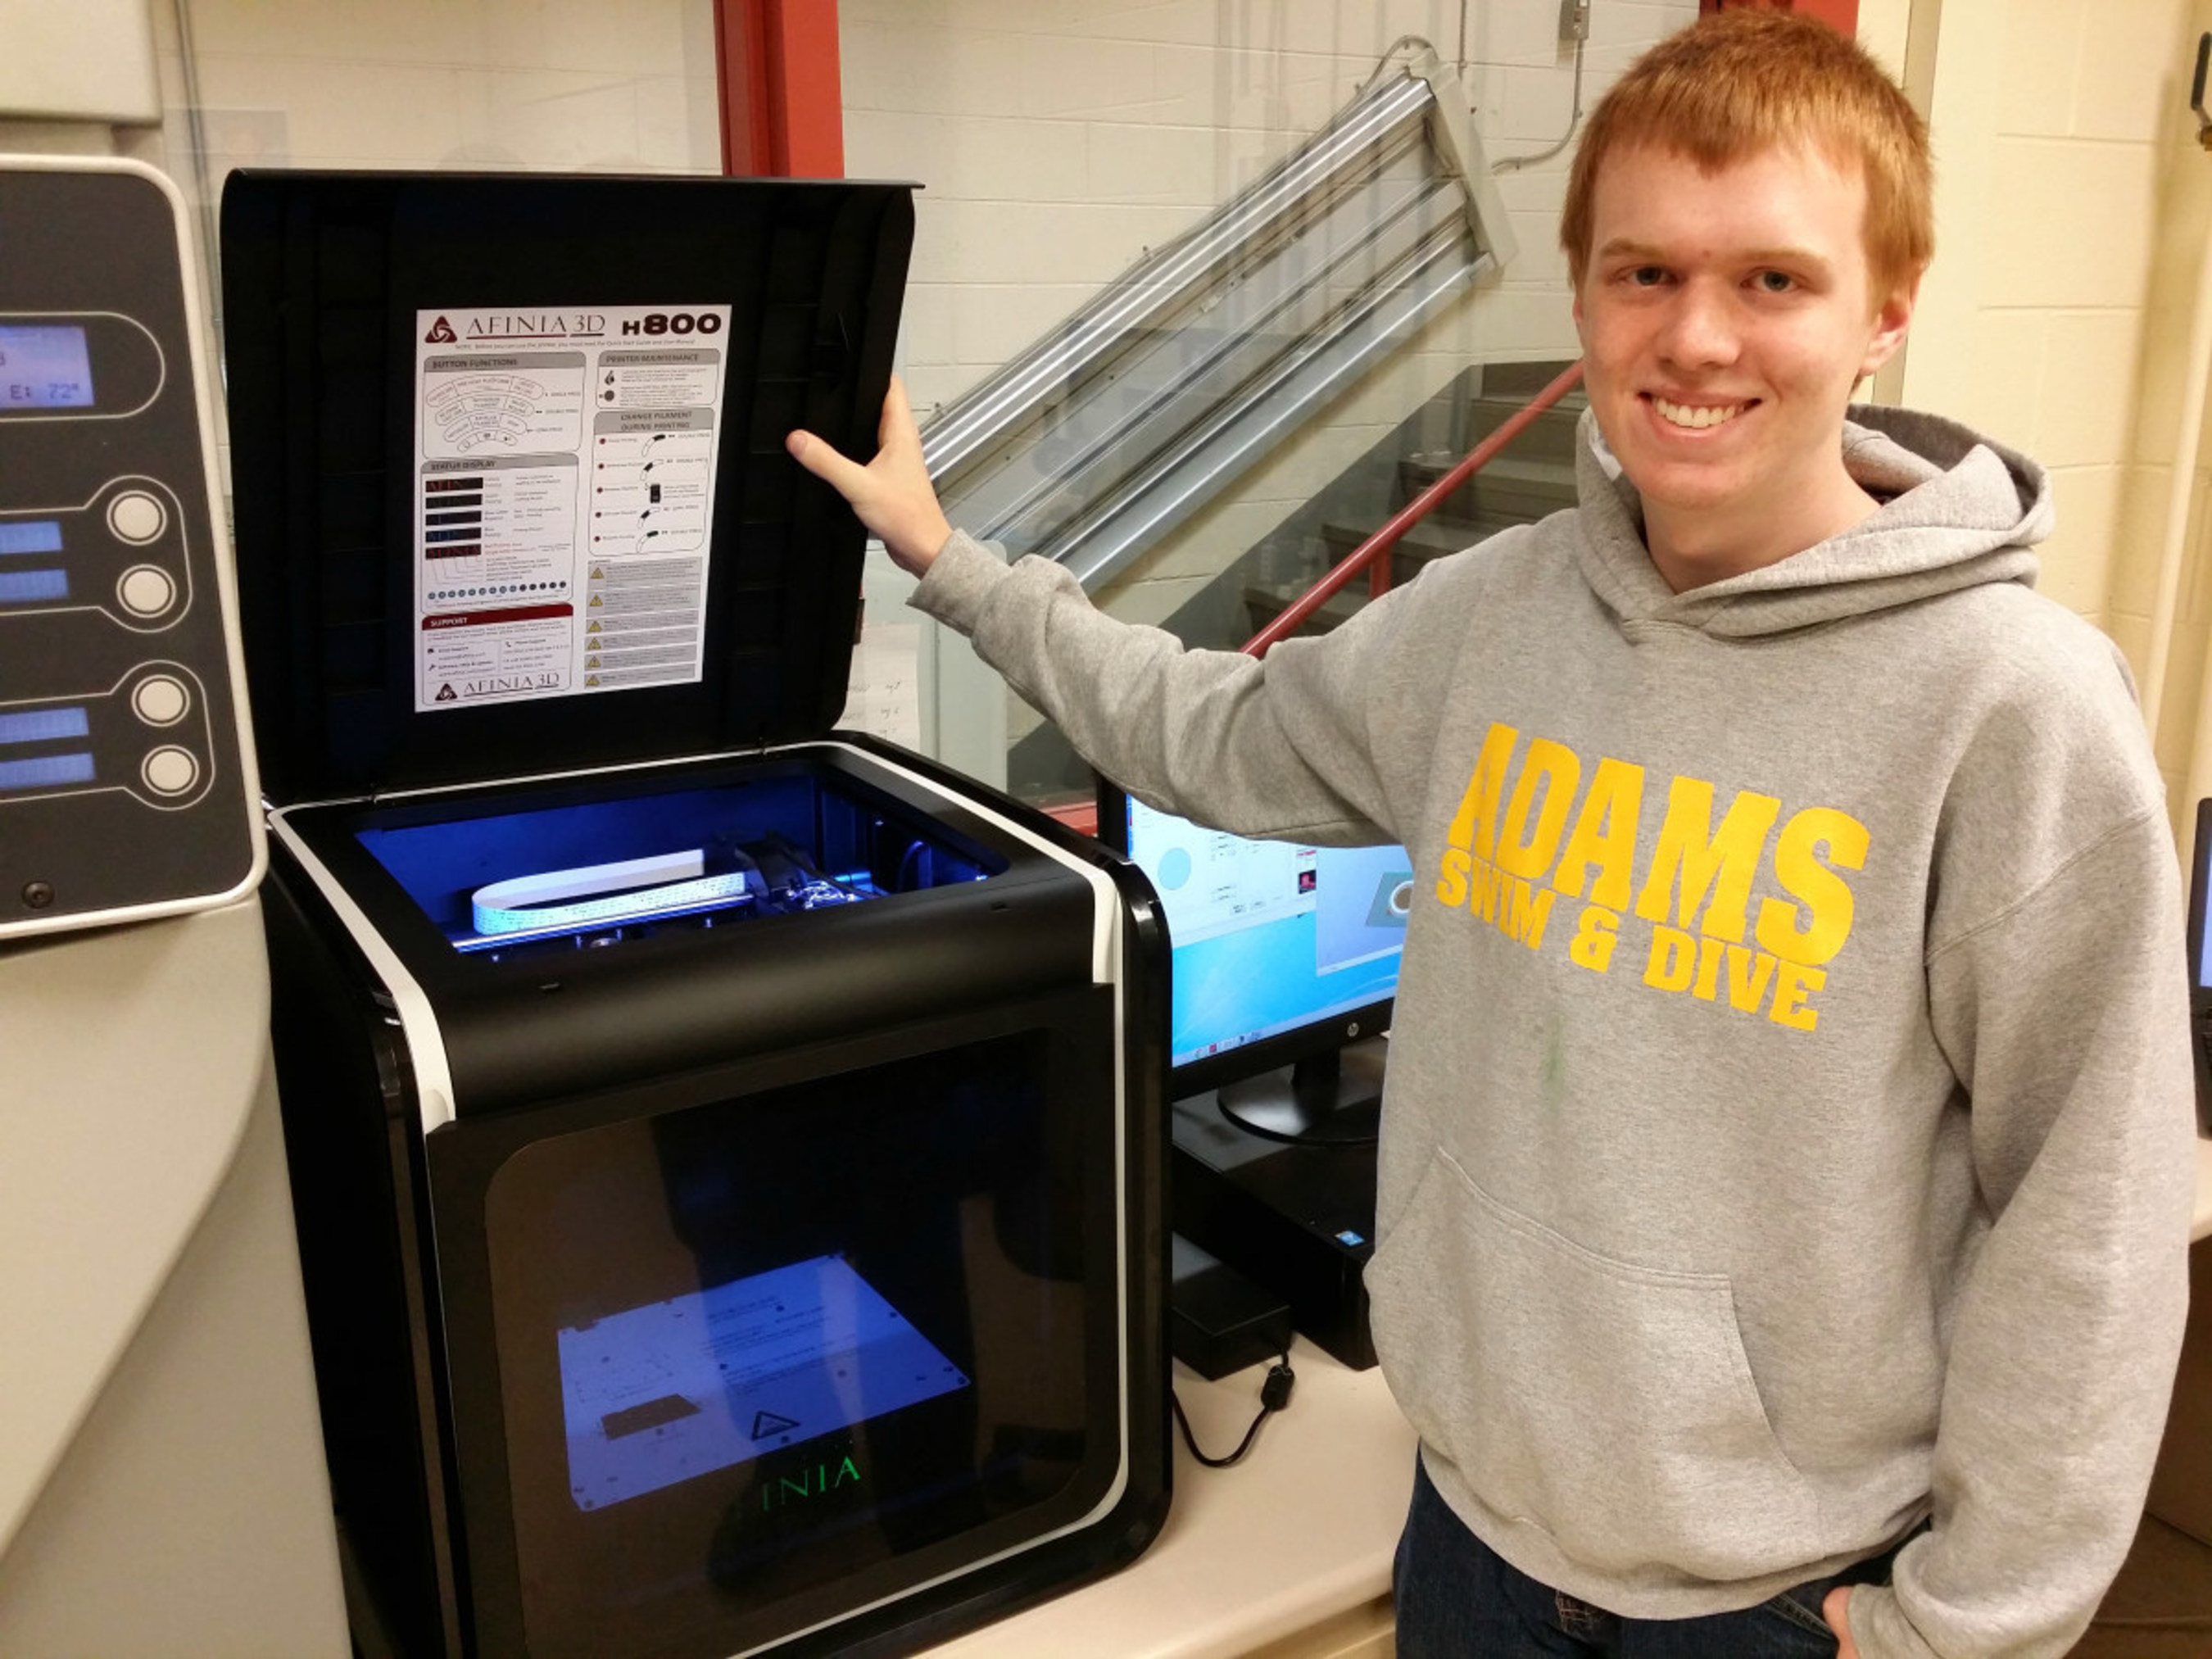 Daniel Alspach, a student at Oakland Schools Technical Campus Northeast in Pontiac, Michigan, works with the Afinia 3D printer given by SME